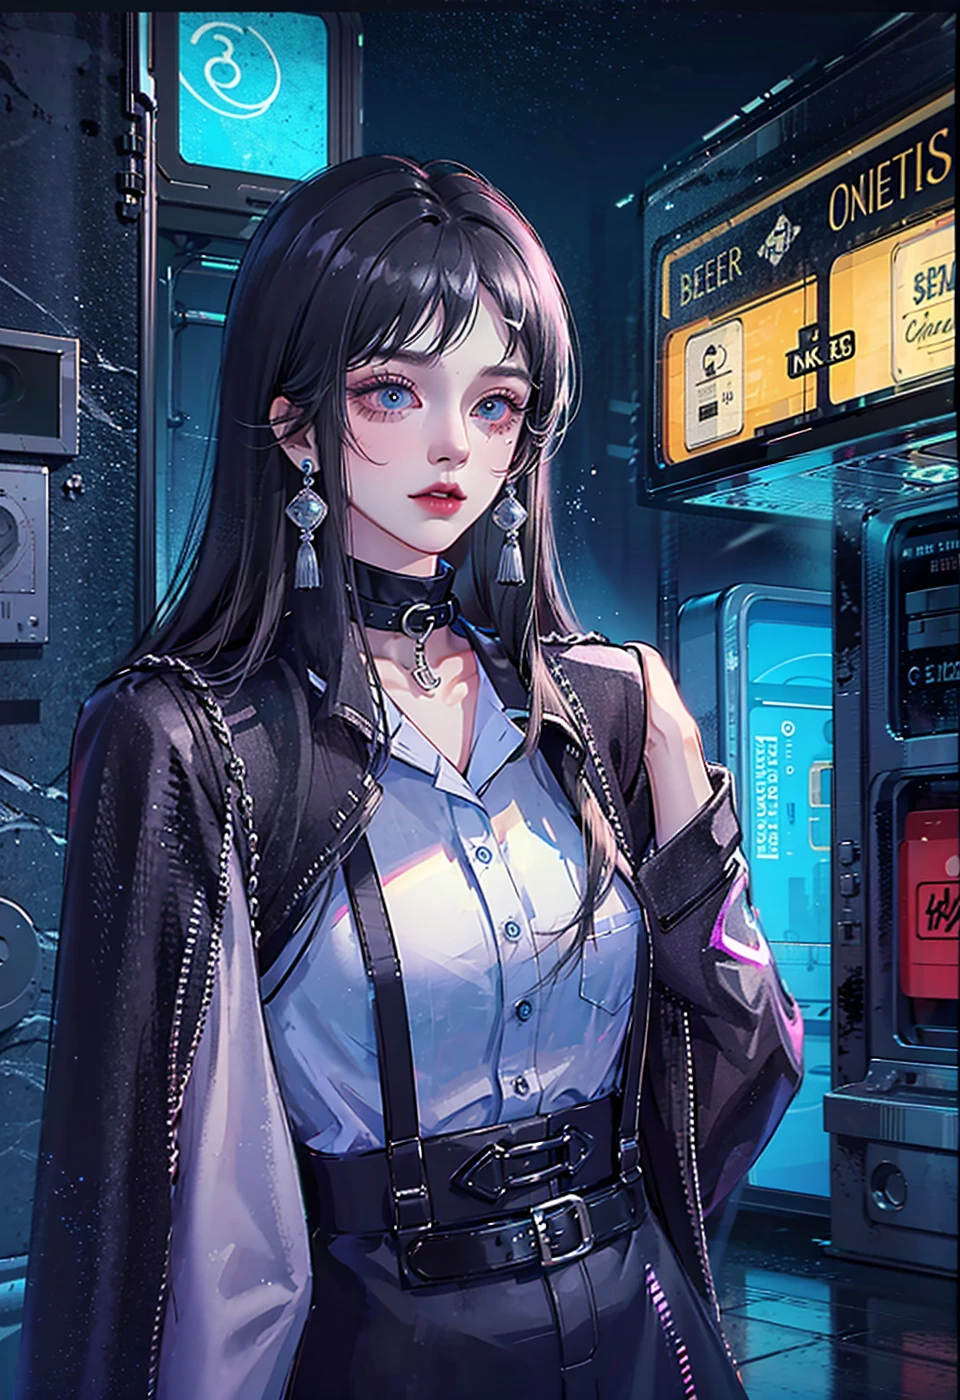 hugefilesizebestquality,highlydetailed,masterpiece,ultra-detailed,extremelydetailedCGunity8kwallpaper,Solo, upper body only, one girl,fashi-girl, long hair, ponytail, black hair, black suspender, gray coat, black collar, metal jewelry, ring earrings, blue eyes, night, neon lights, city, blurred background, 